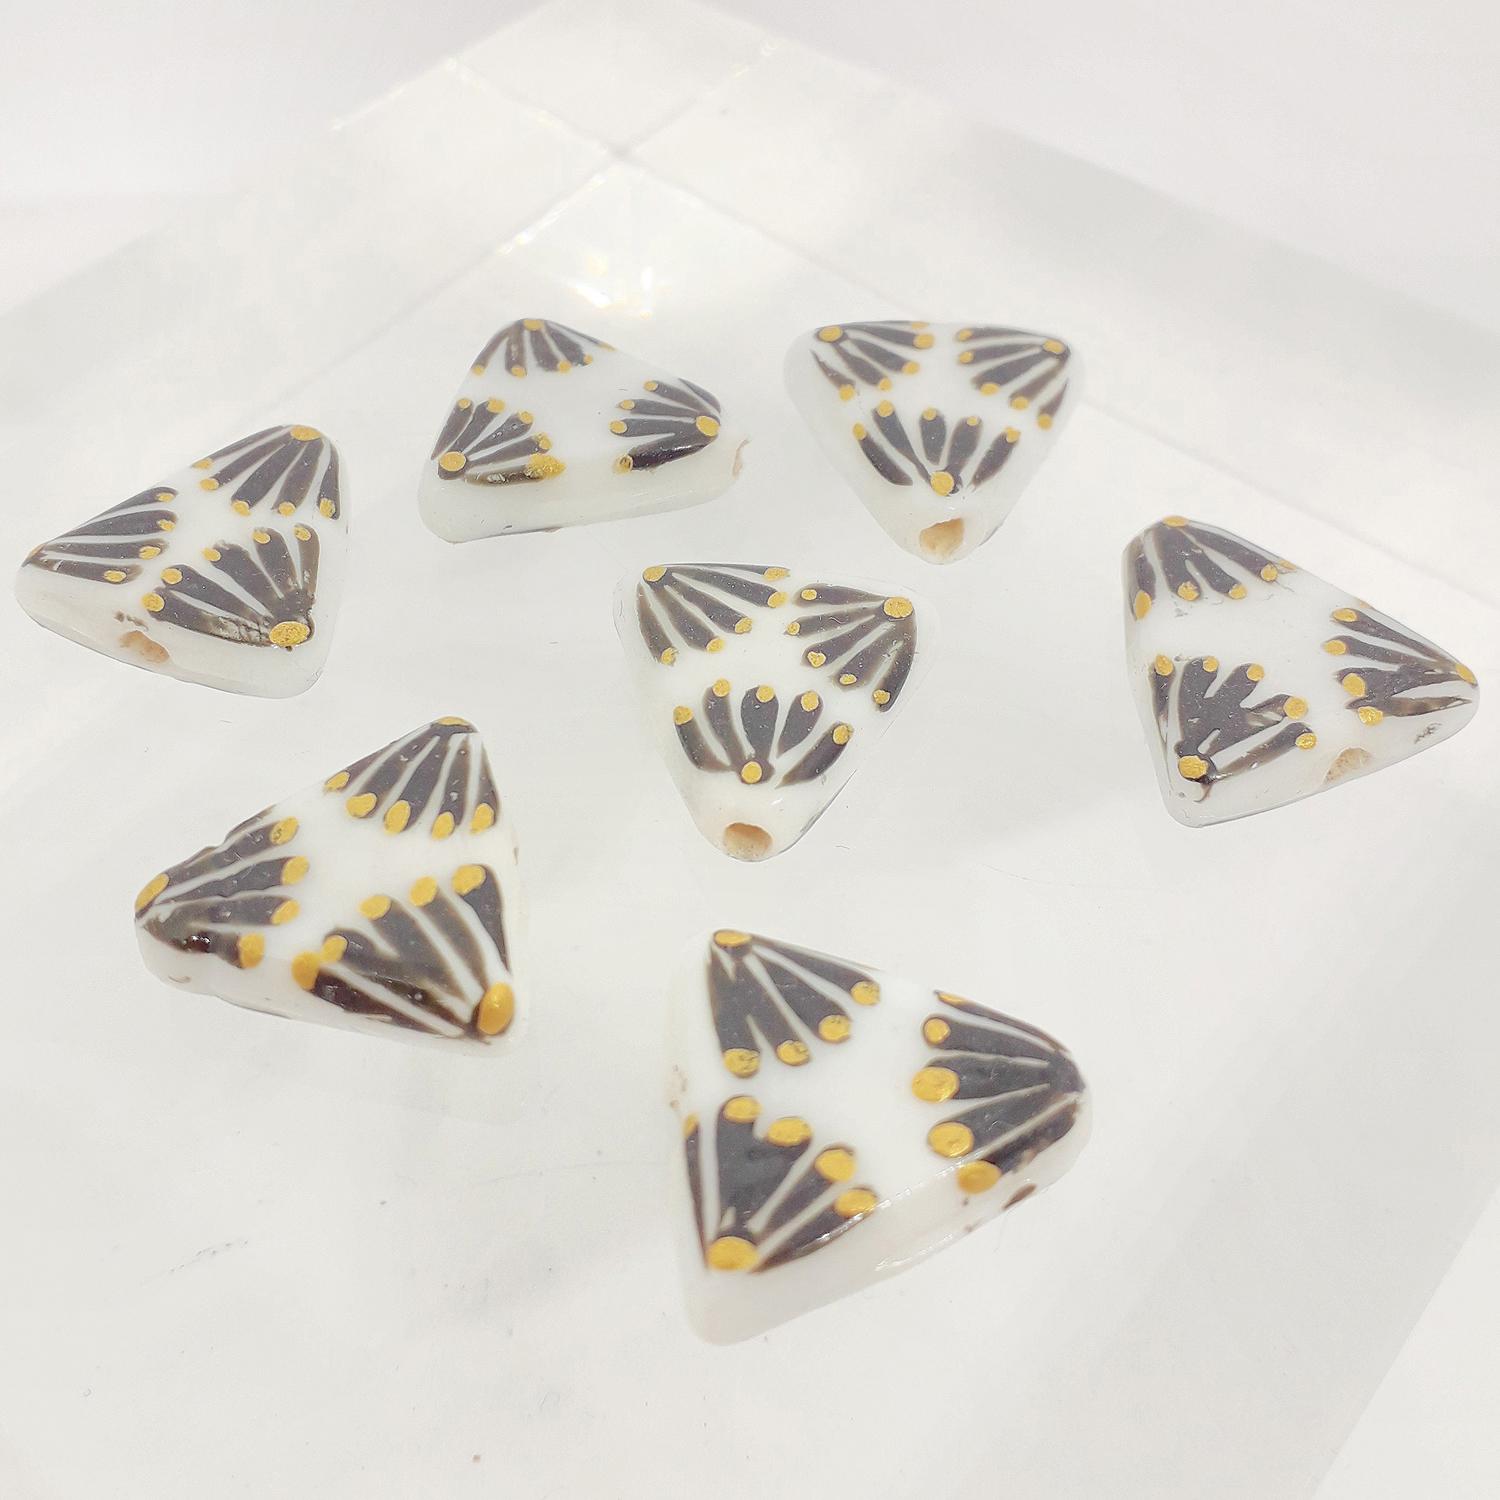 17mm White Glass Triangle Bead with Hand Painted Black and Gold Fan Design